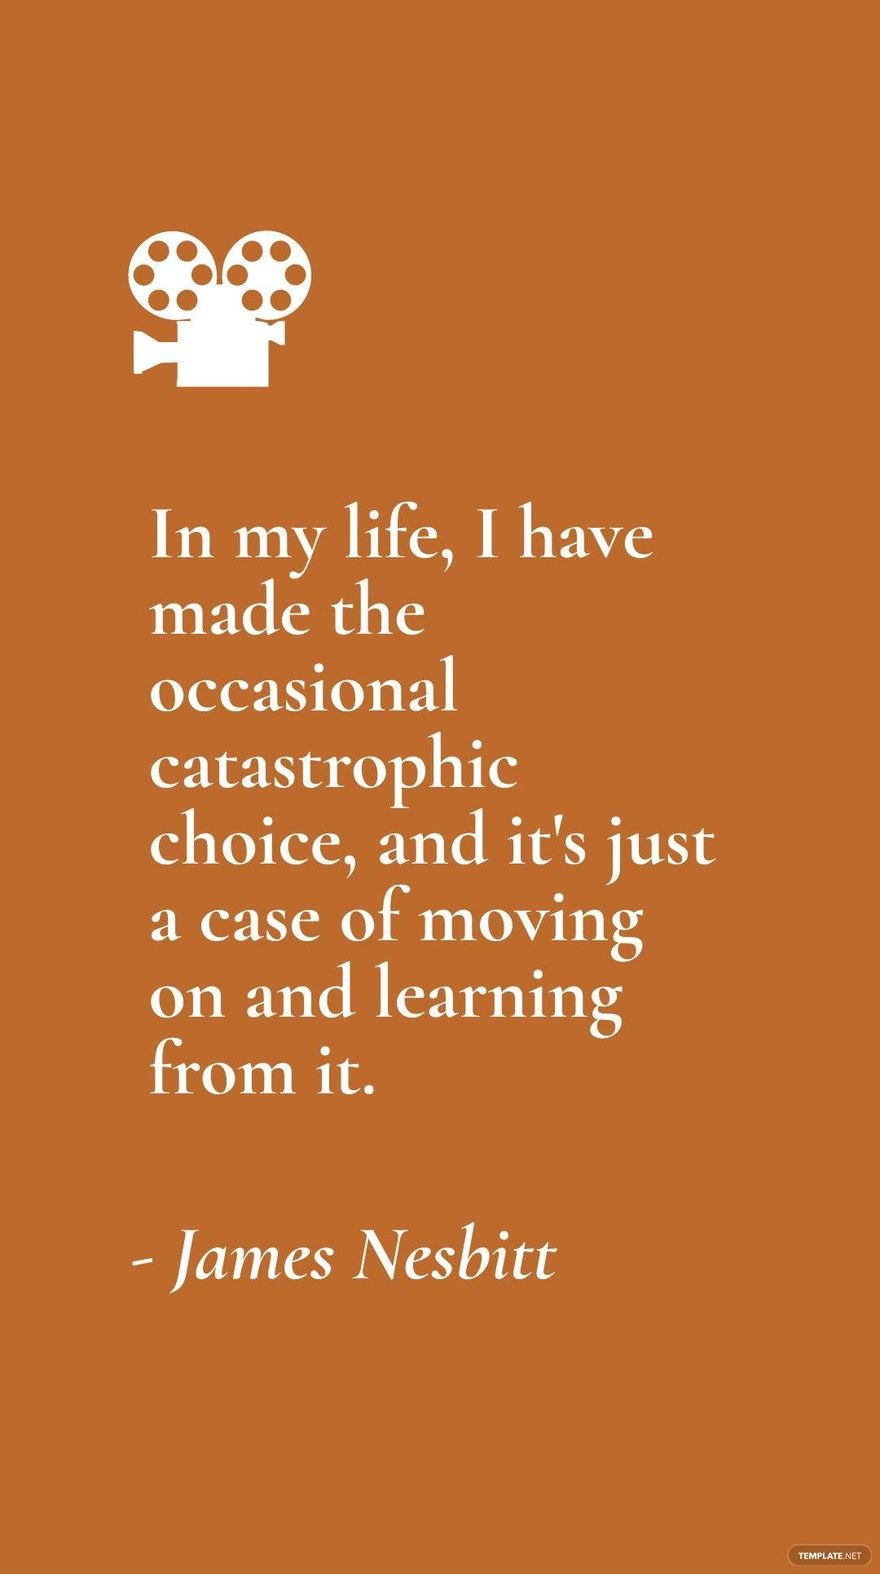 James Nesbitt - In my life, I have made the occasional catastrophic choice, and it's just a case of moving on and learning from it.